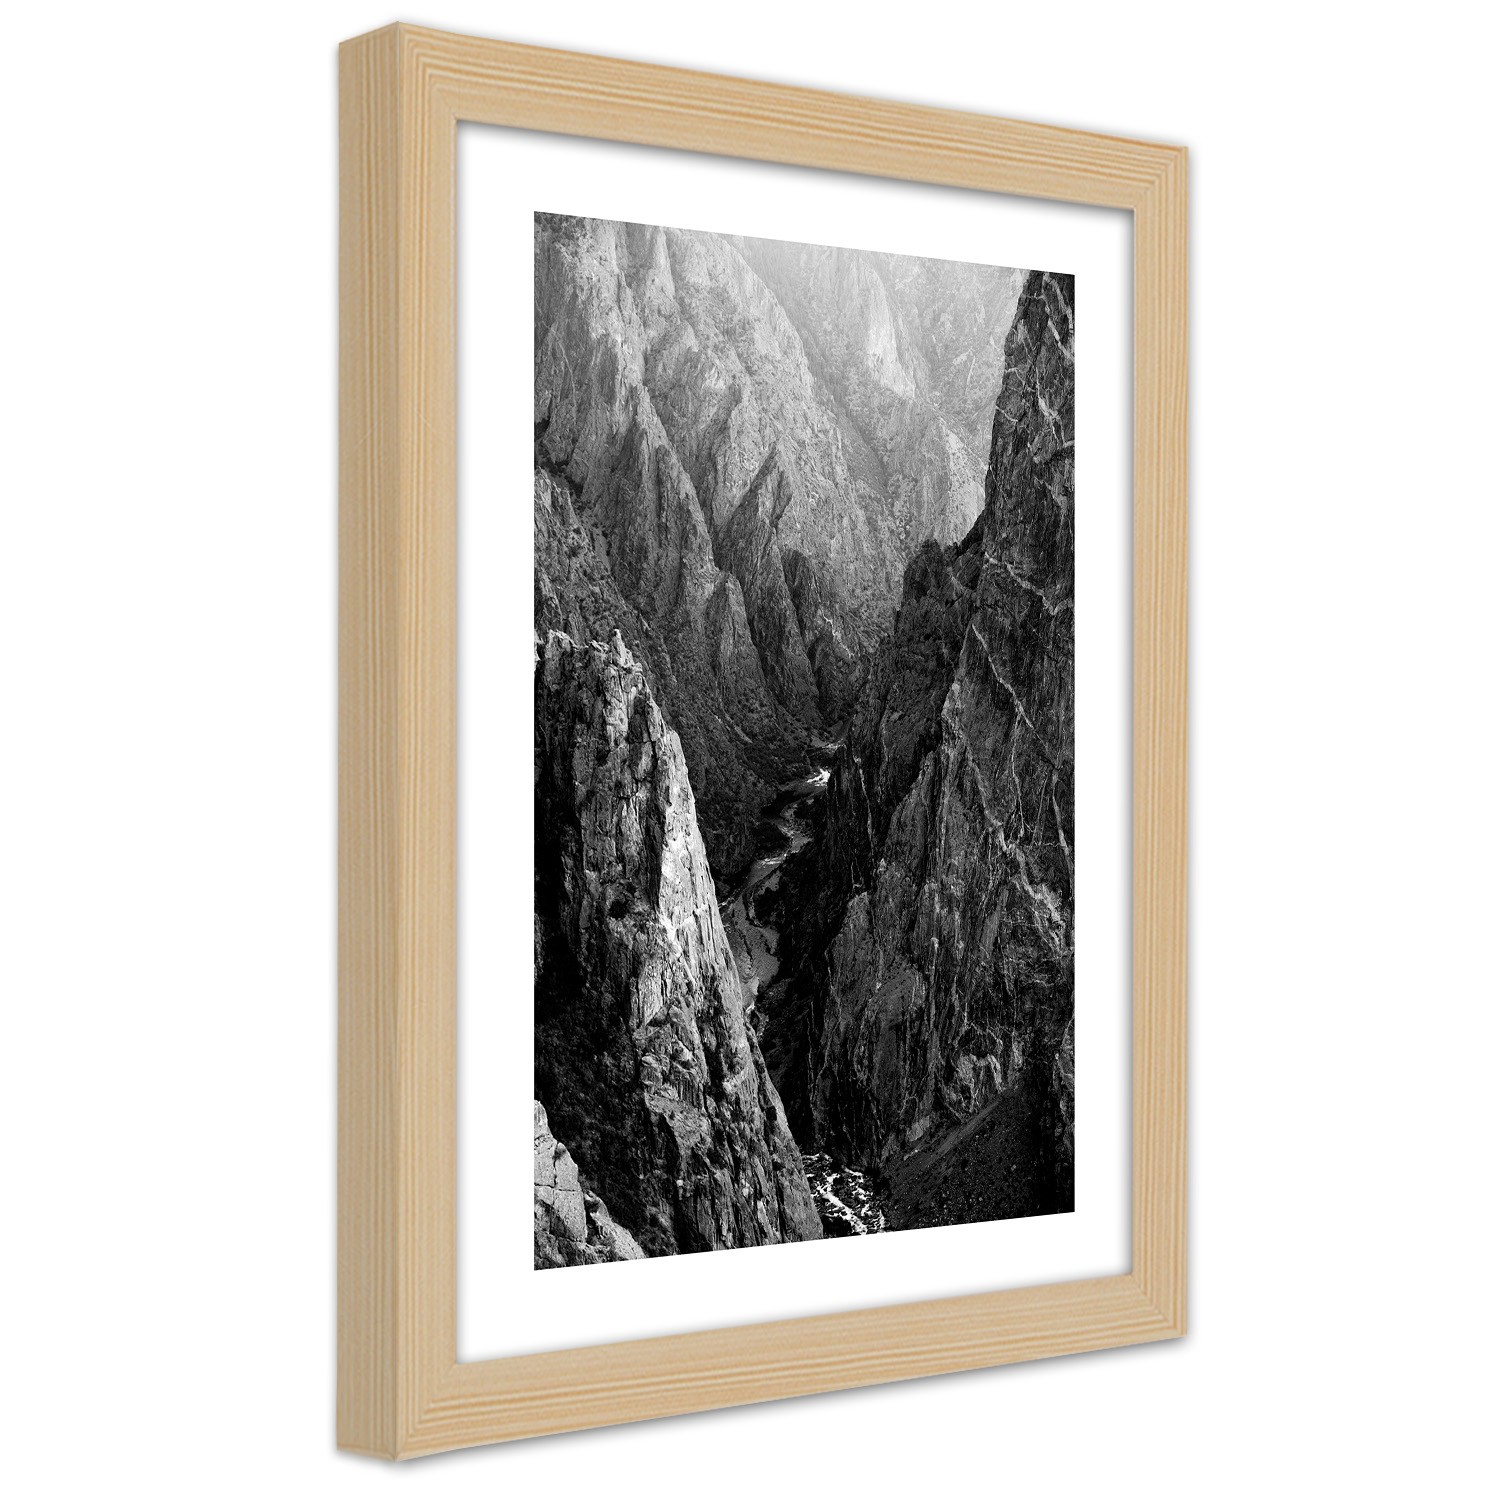 Caro Picture in natural frame, Black and white mountain landscape